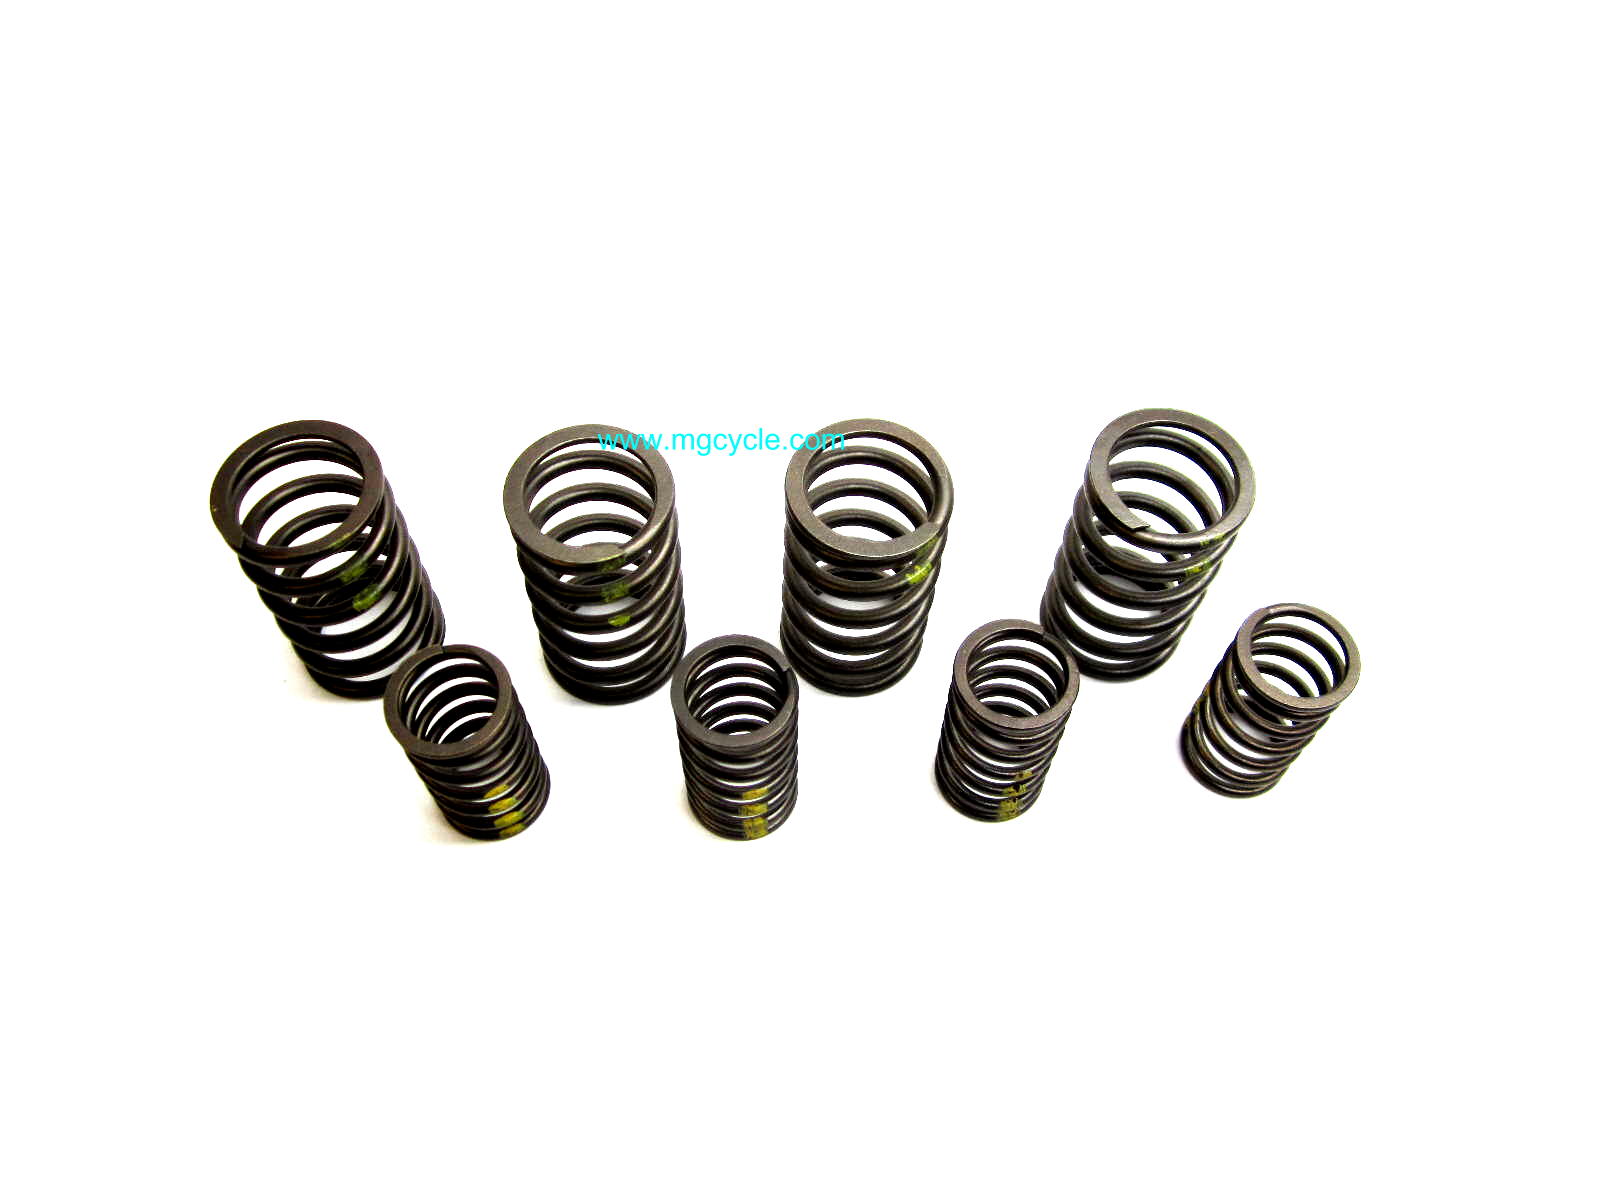 Valve spring kit, 4 standard inners, 4 28037460 outers